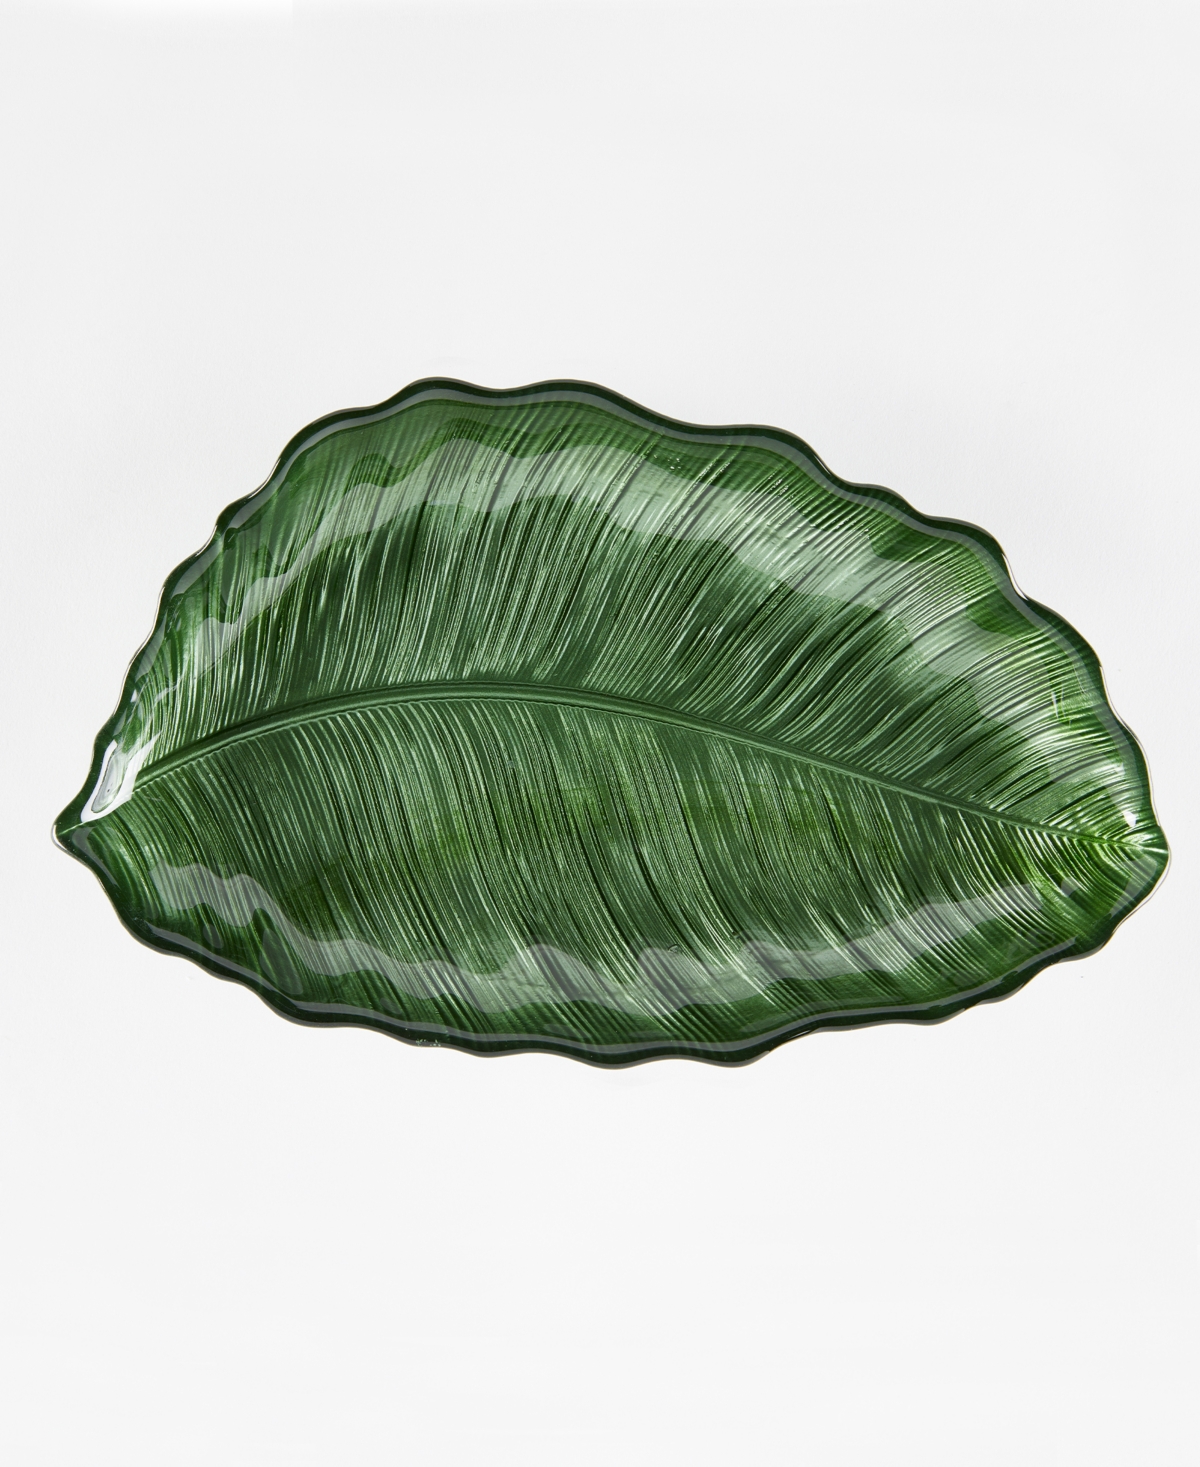 Tropical Palm Plate, Set of 2 - Green